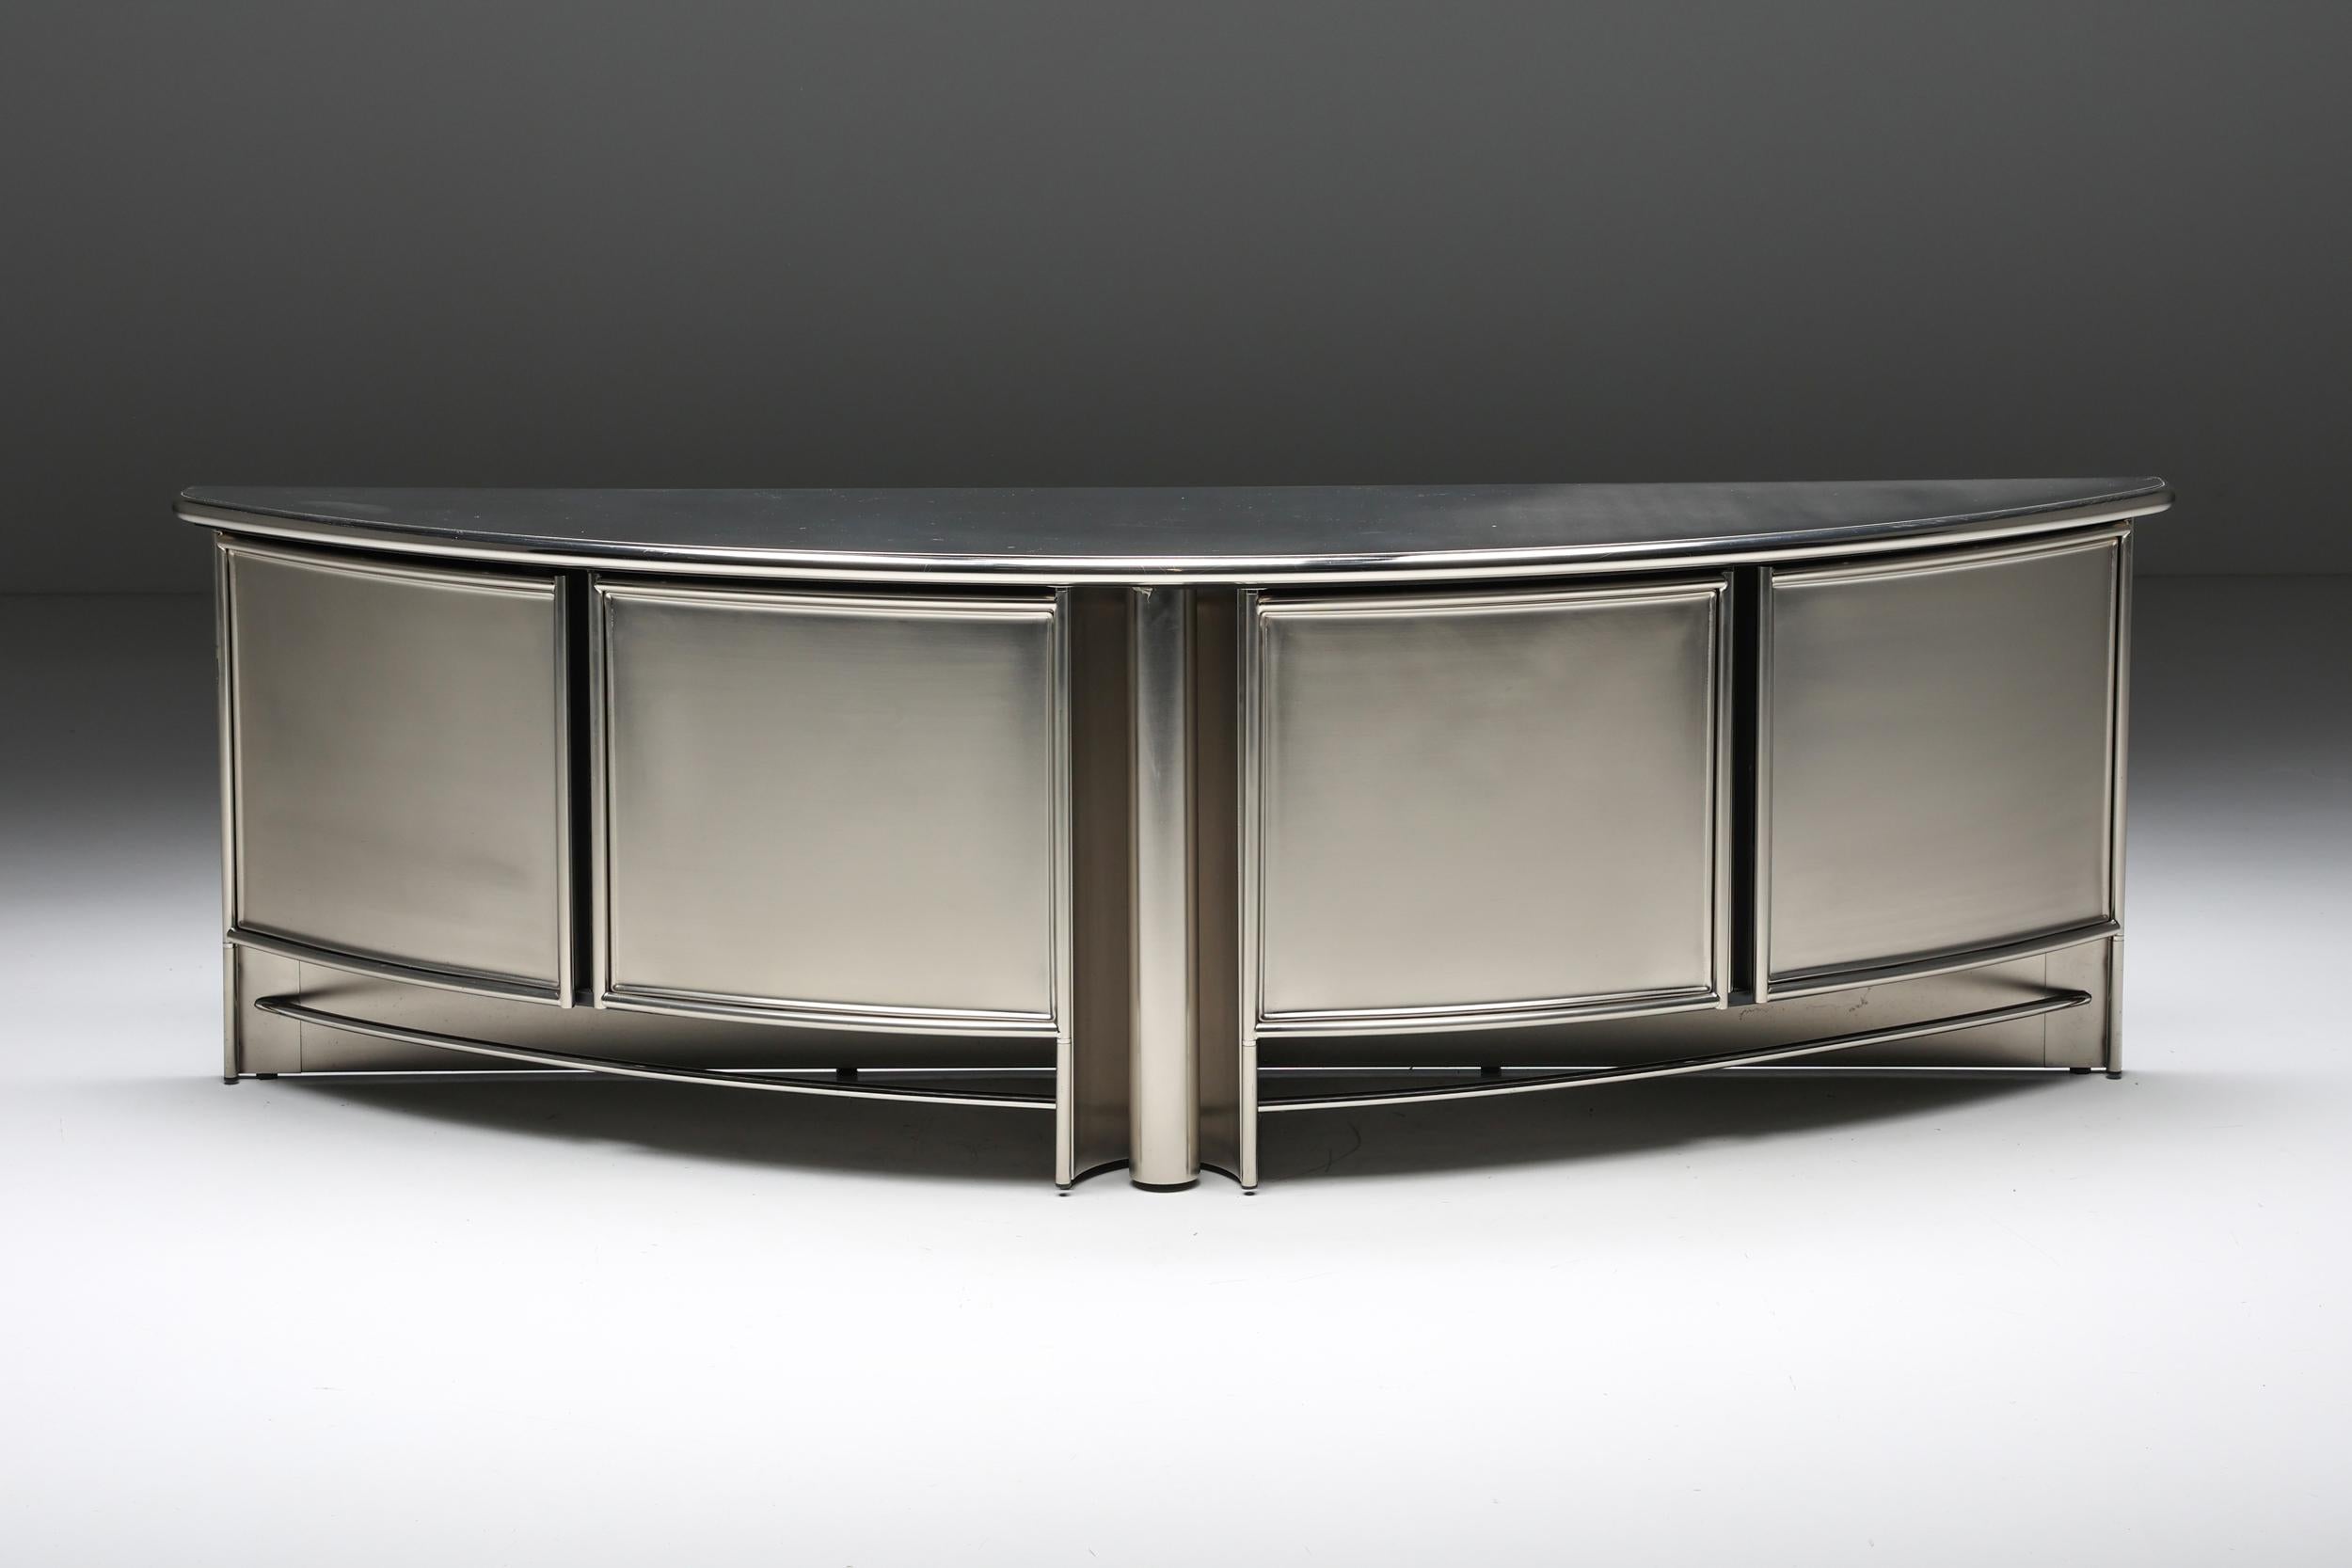 Maison Jansen; Post-Modern; Postmodern; Stainless Steel; Curved; Credenza; Cabinet; Storage; Storing Space; Hollywood Regency; Geometric; France; Romeo Rega; Willy Rizzo; Wall Piece;

A rare post-modern stainless steel curved credenza in the style